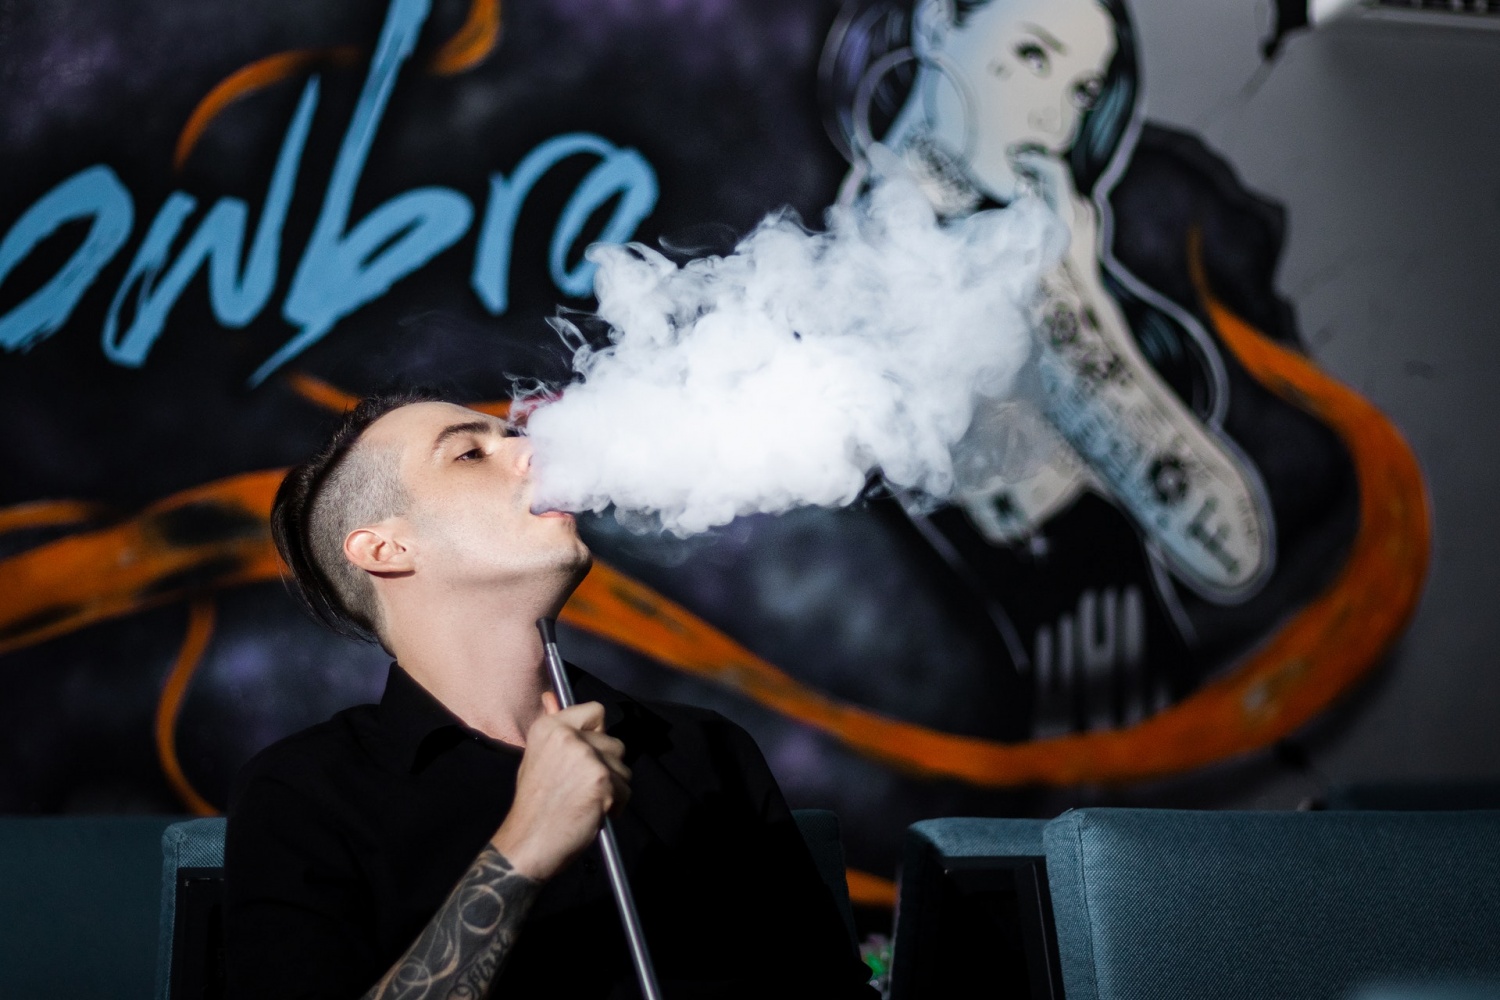 Vape, e-Cigarettes and their quitting withdrawal effects